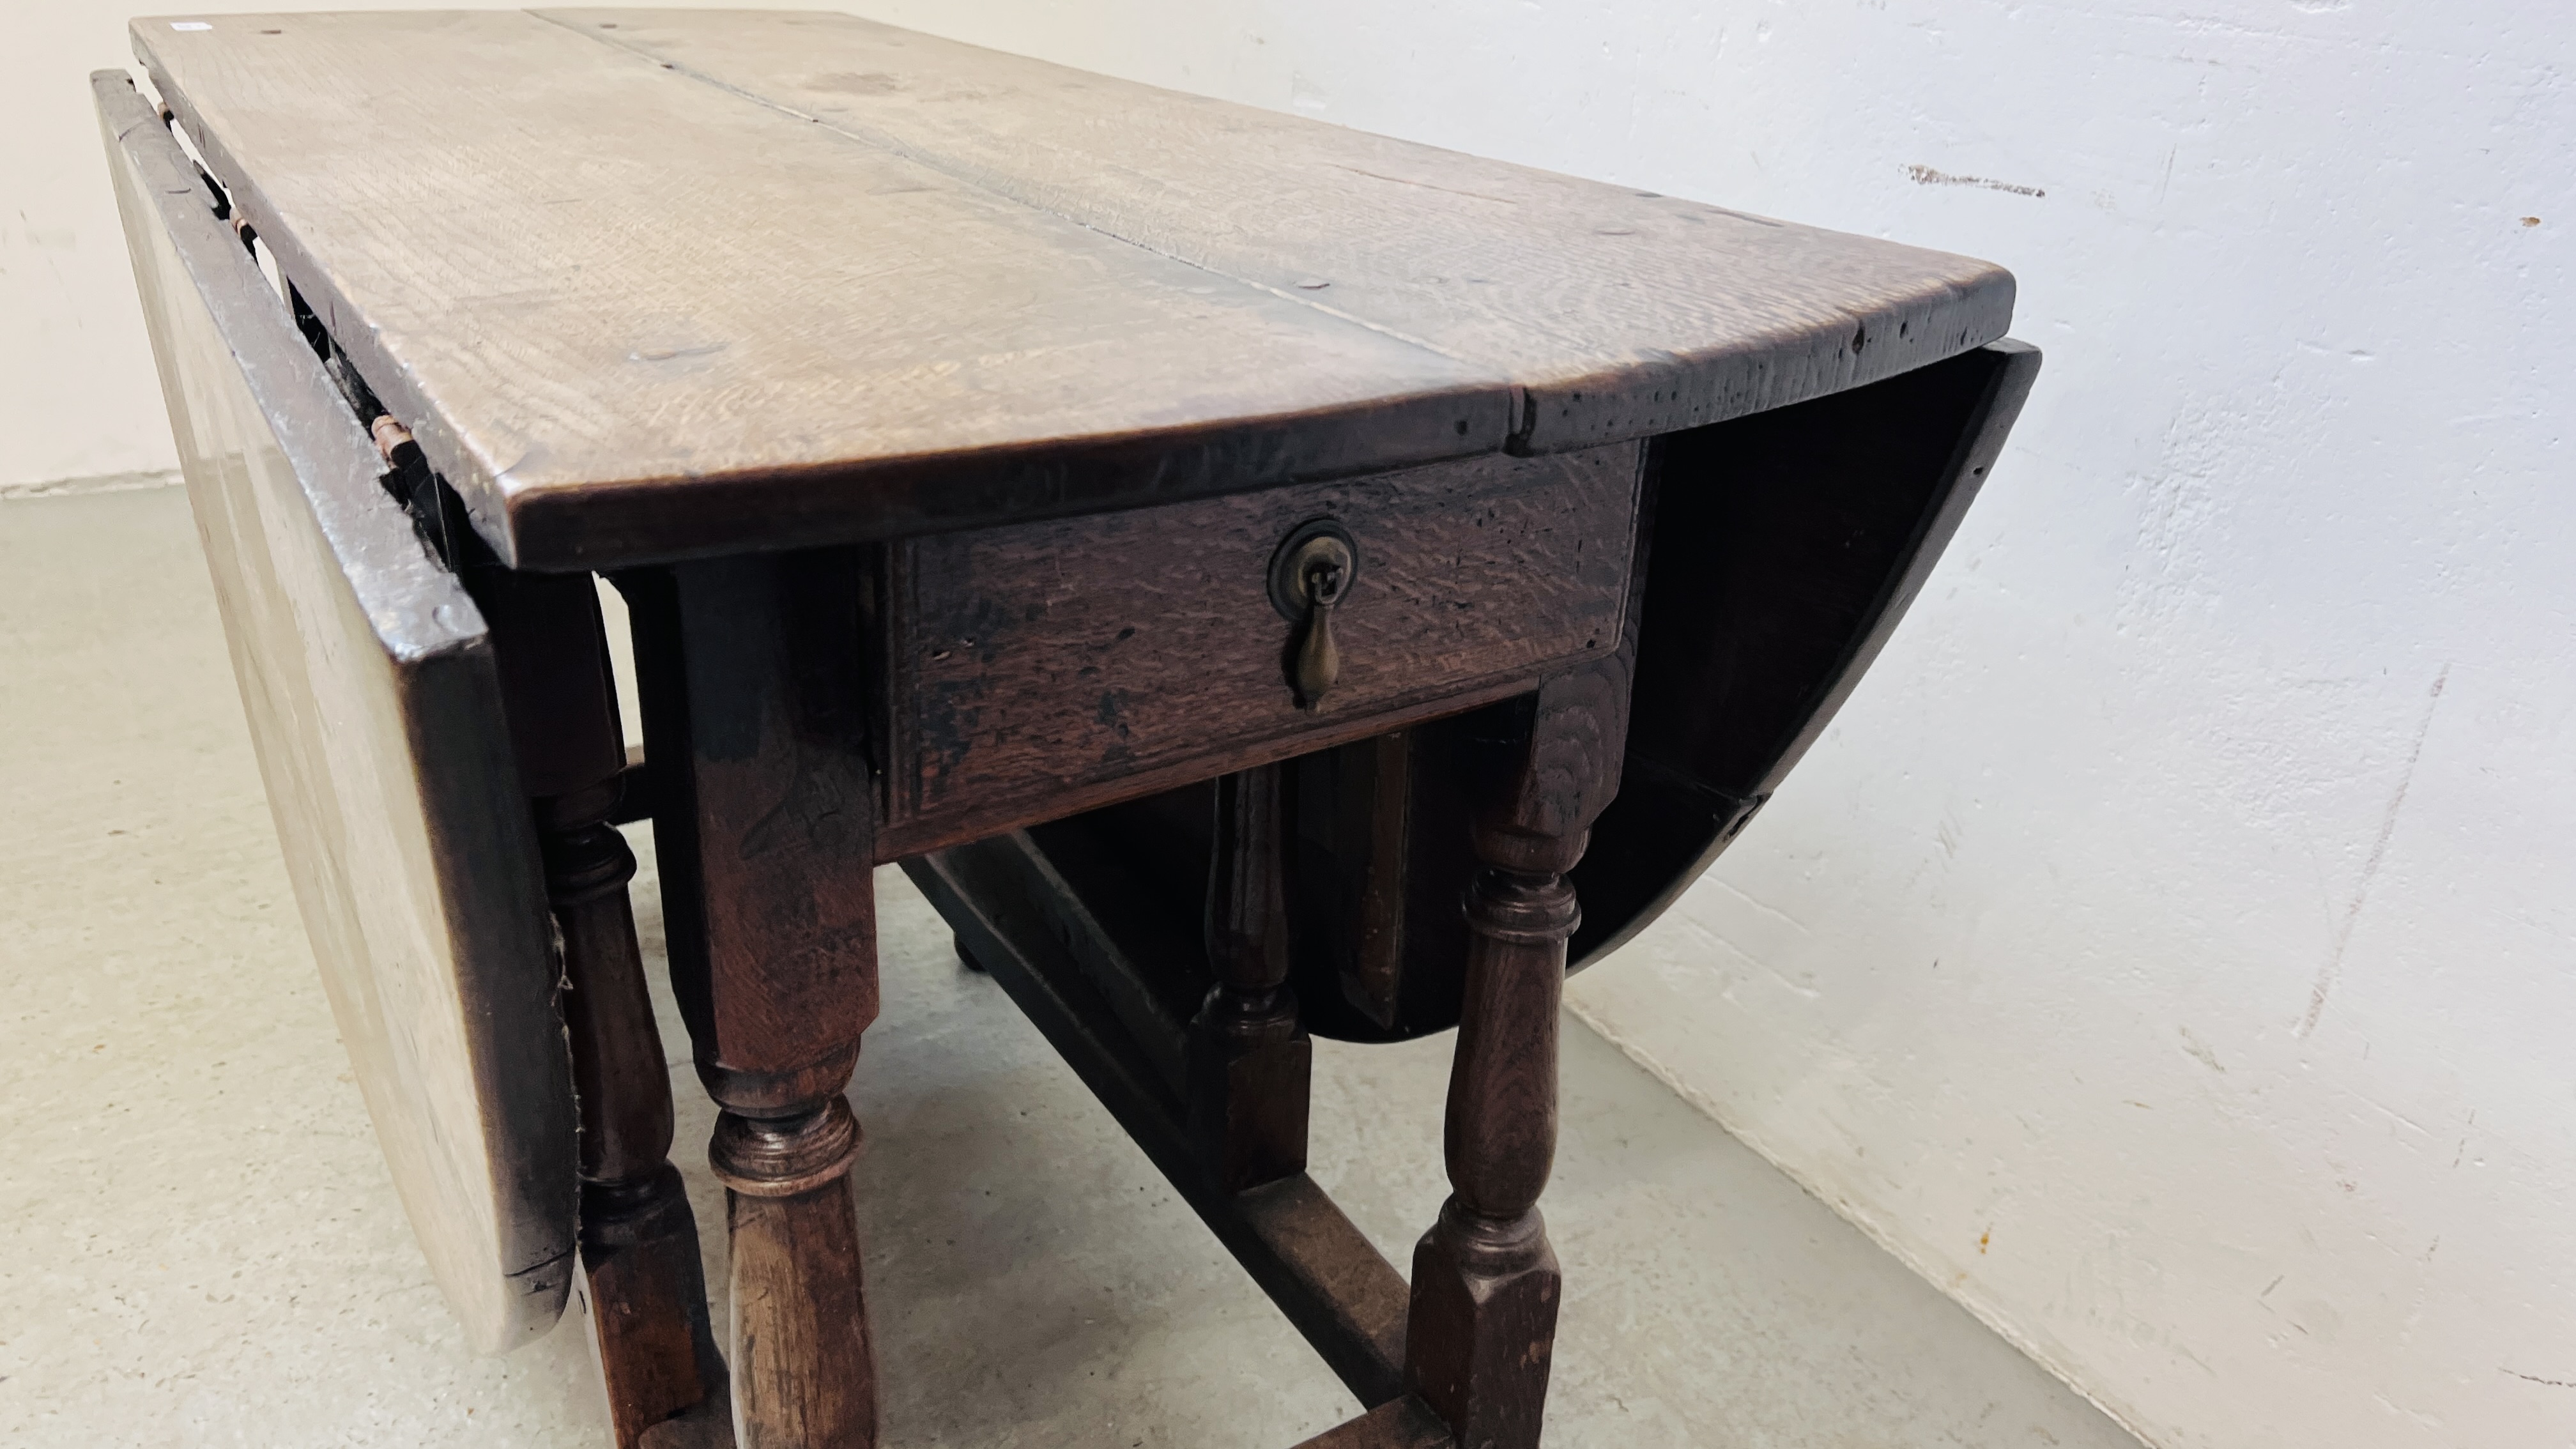 AN EARLY C18th OAK GATELEG DINING TABLE, L 156CM. - Image 3 of 11